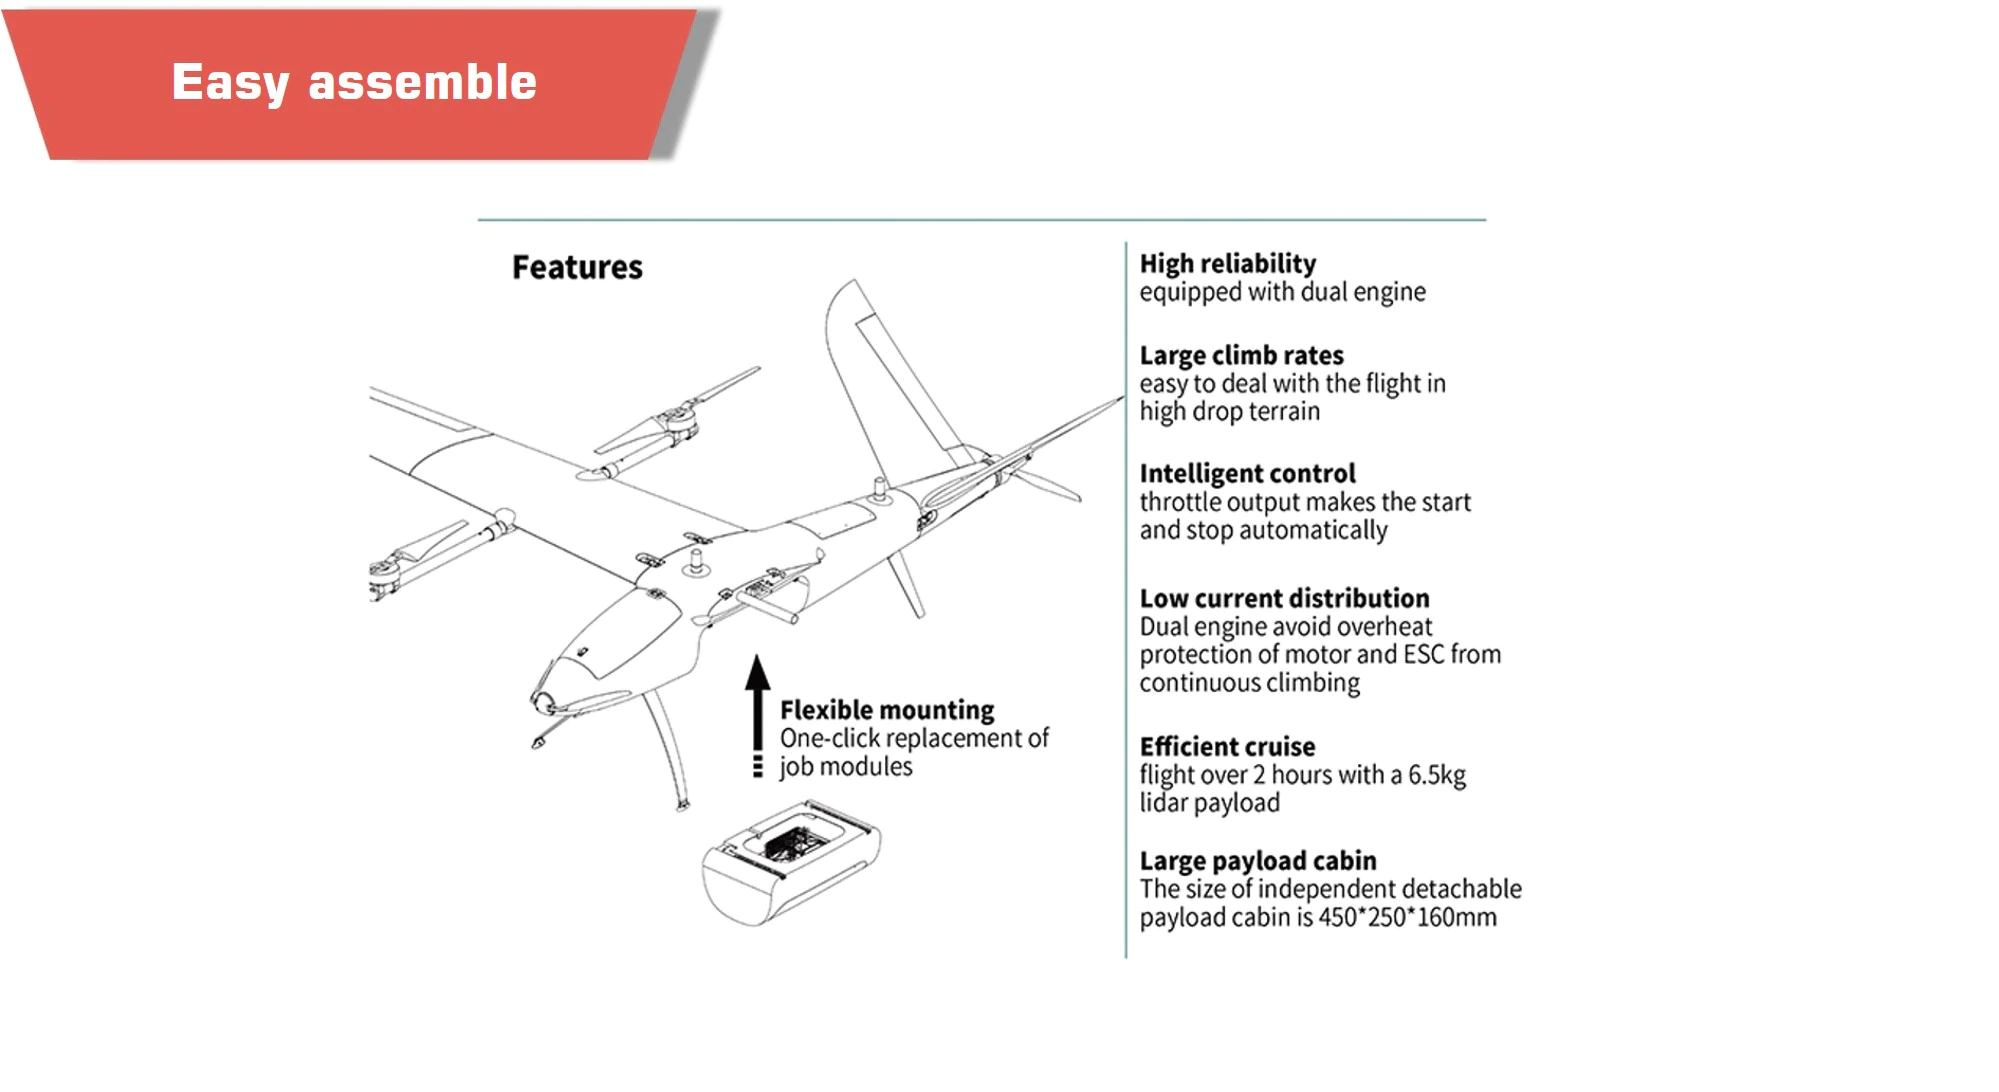 G25 vtol fixed wing uav drone for survey and rescue with easy changeable payload bin p3 motionew